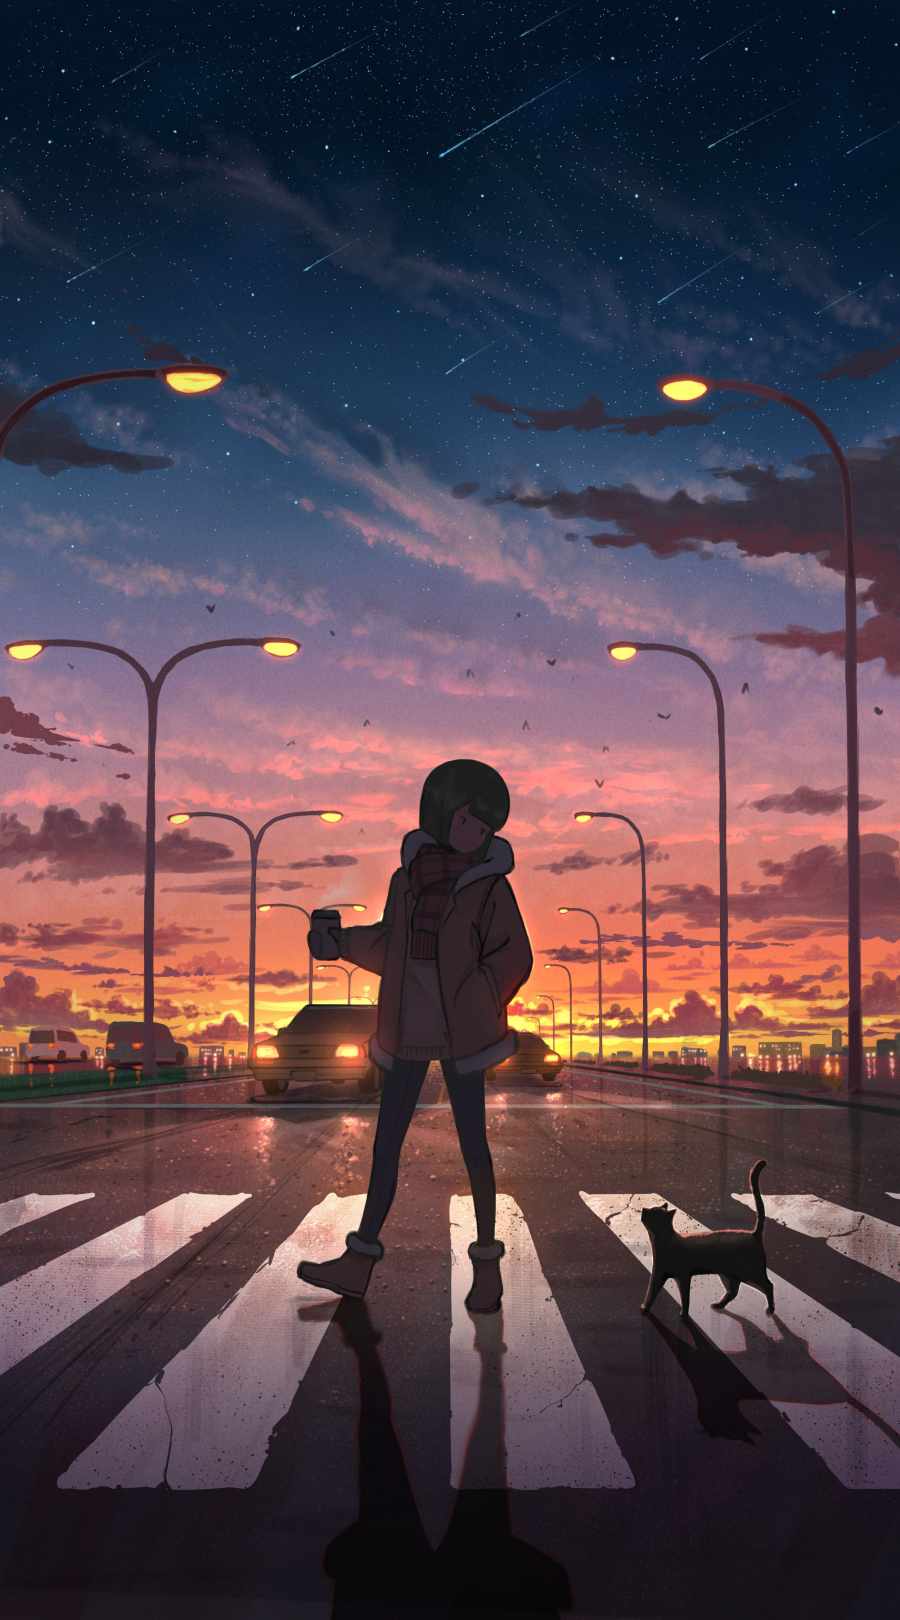 Girl With Cat Anime IPhone Wallpaper Wallpaper, iPhone Wallpaper